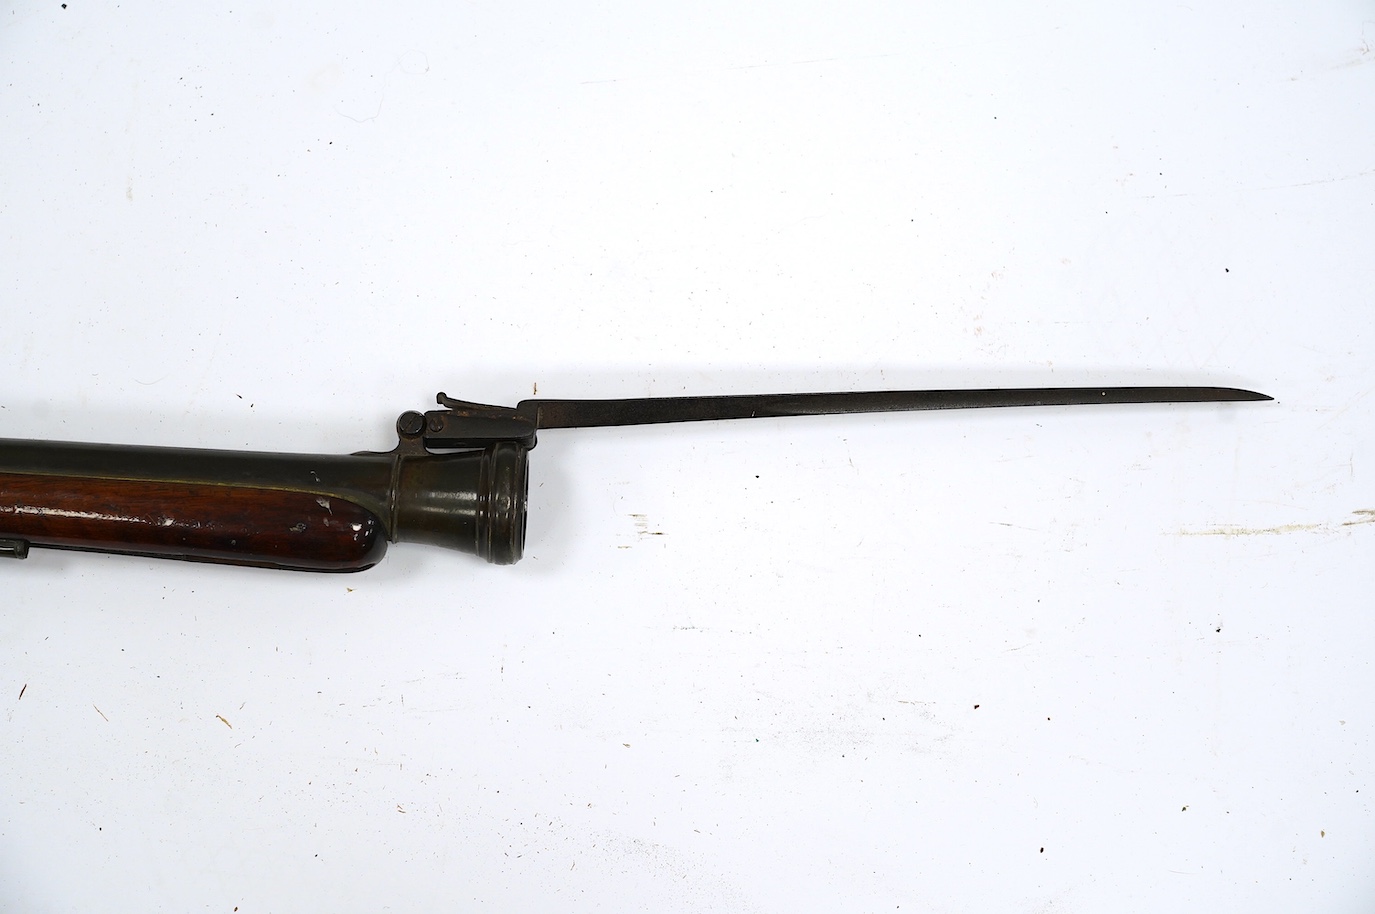 A good brass barrelled flintlock blunderbuss by Goodwin of London, c.1820, port octagonal brass barrel, Birmingham proofed, fitted with spring bayonet, signed lock with sliding safety bolt, engraved brass furniture, barr